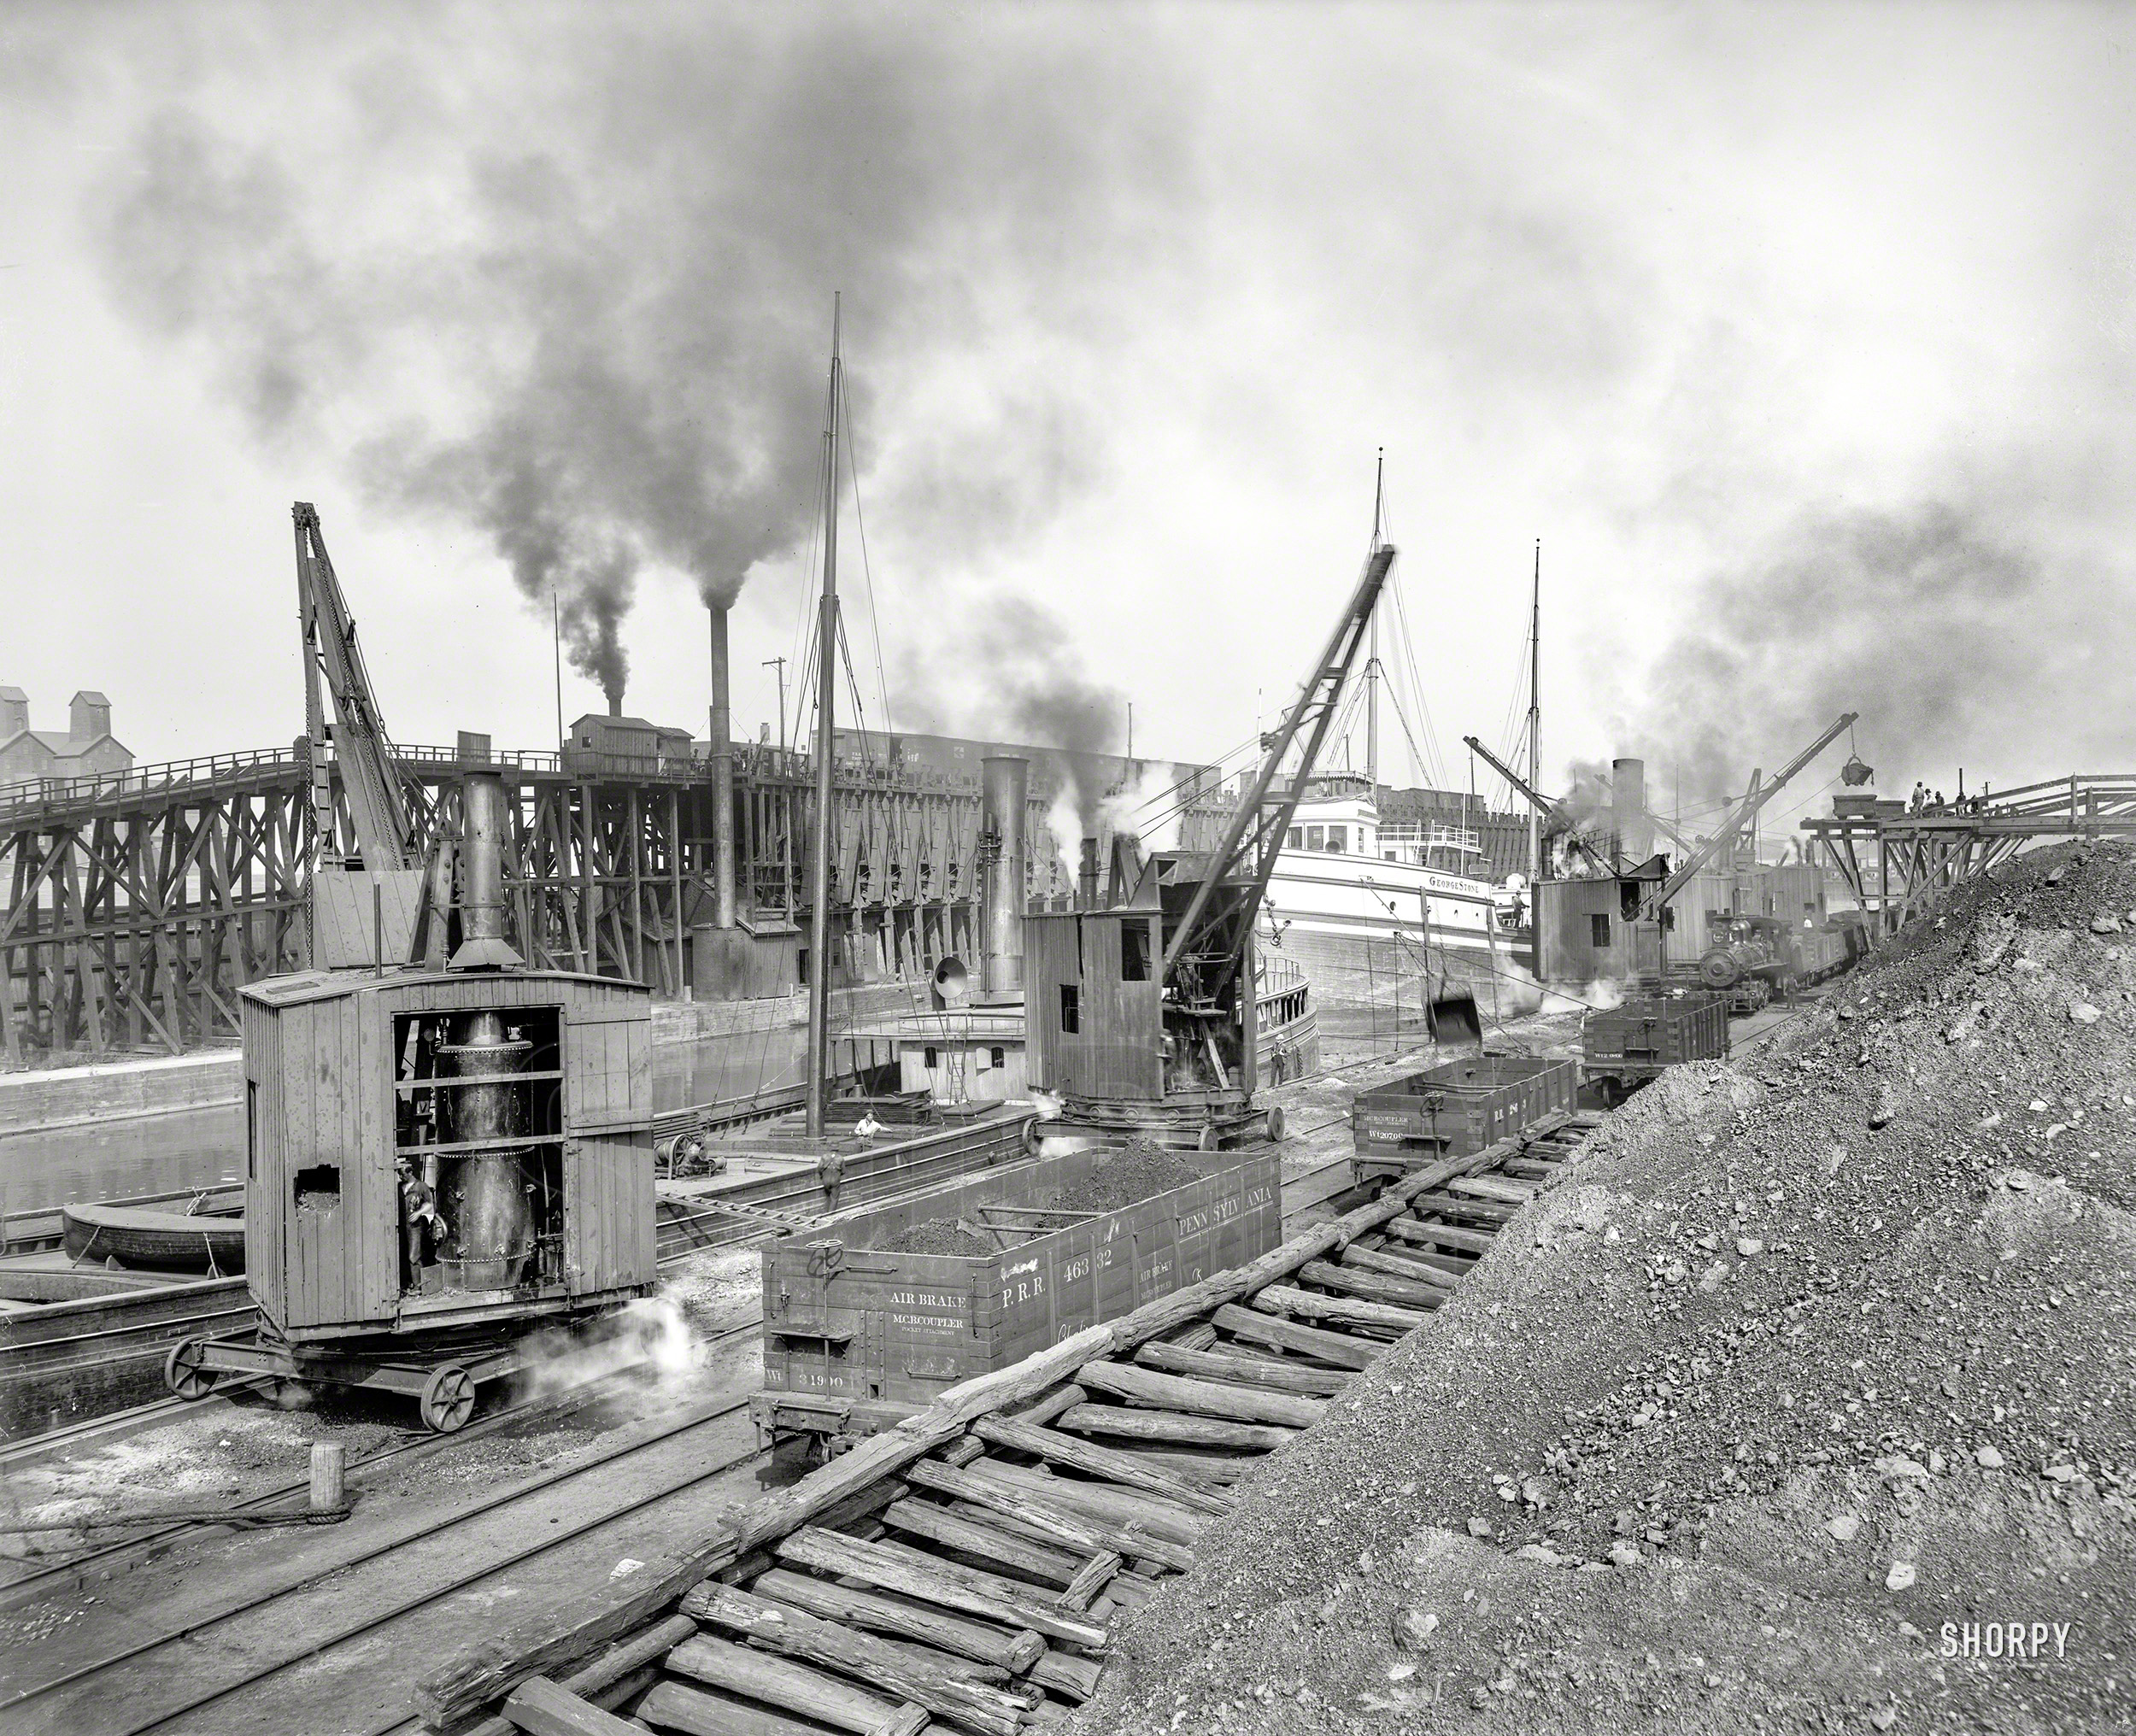 Circa 1900. "Whirleys unloading ore, Penna. R.R. docks, Erie, Pennsylvania." 8x10 inch dry plate glass negative, Detroit Publishing Company. View full size.